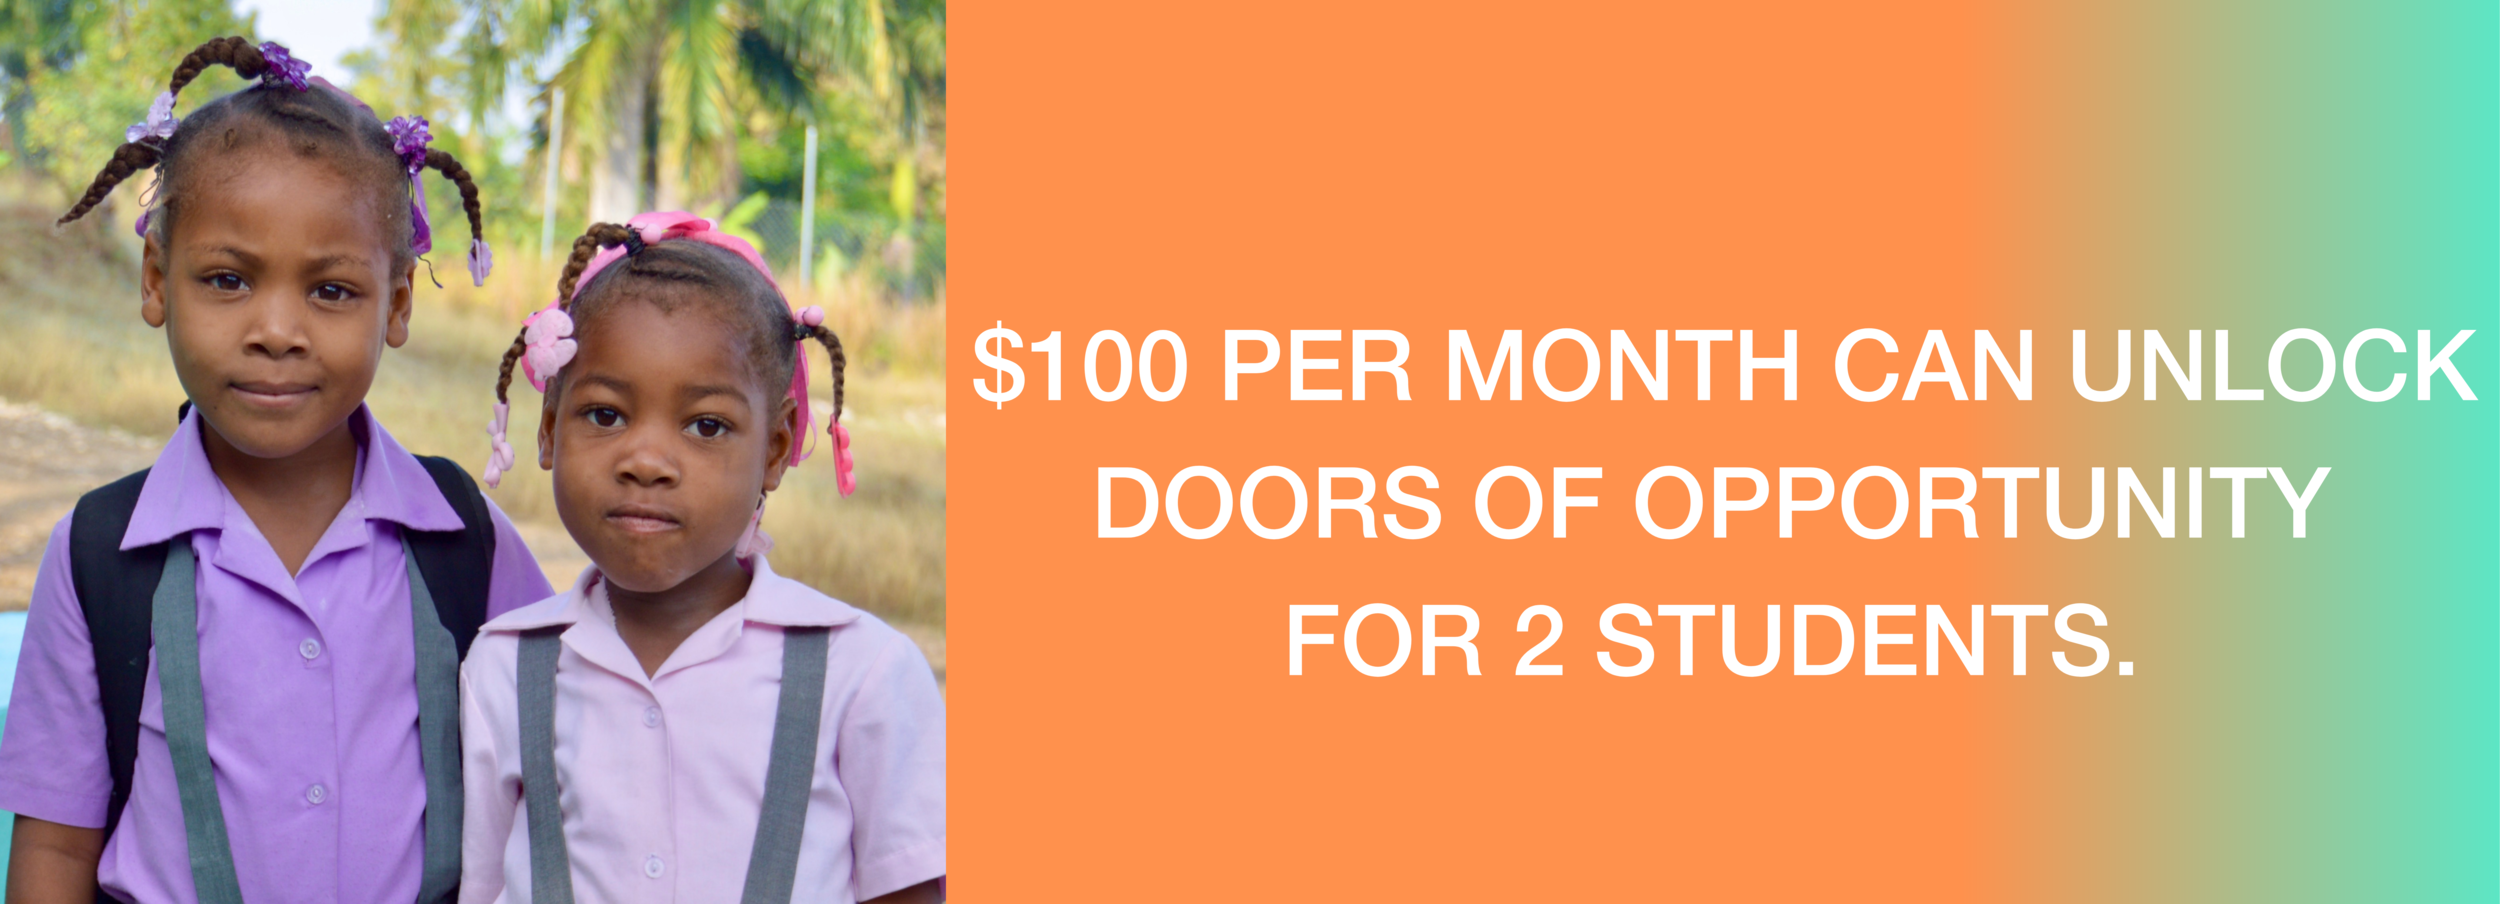 $50 PER MONTH CAN UNLOCK DOORS OF OPPORTUNITY FOR 1 STUDENT. EVERY DONATION COUNTS.-3.png